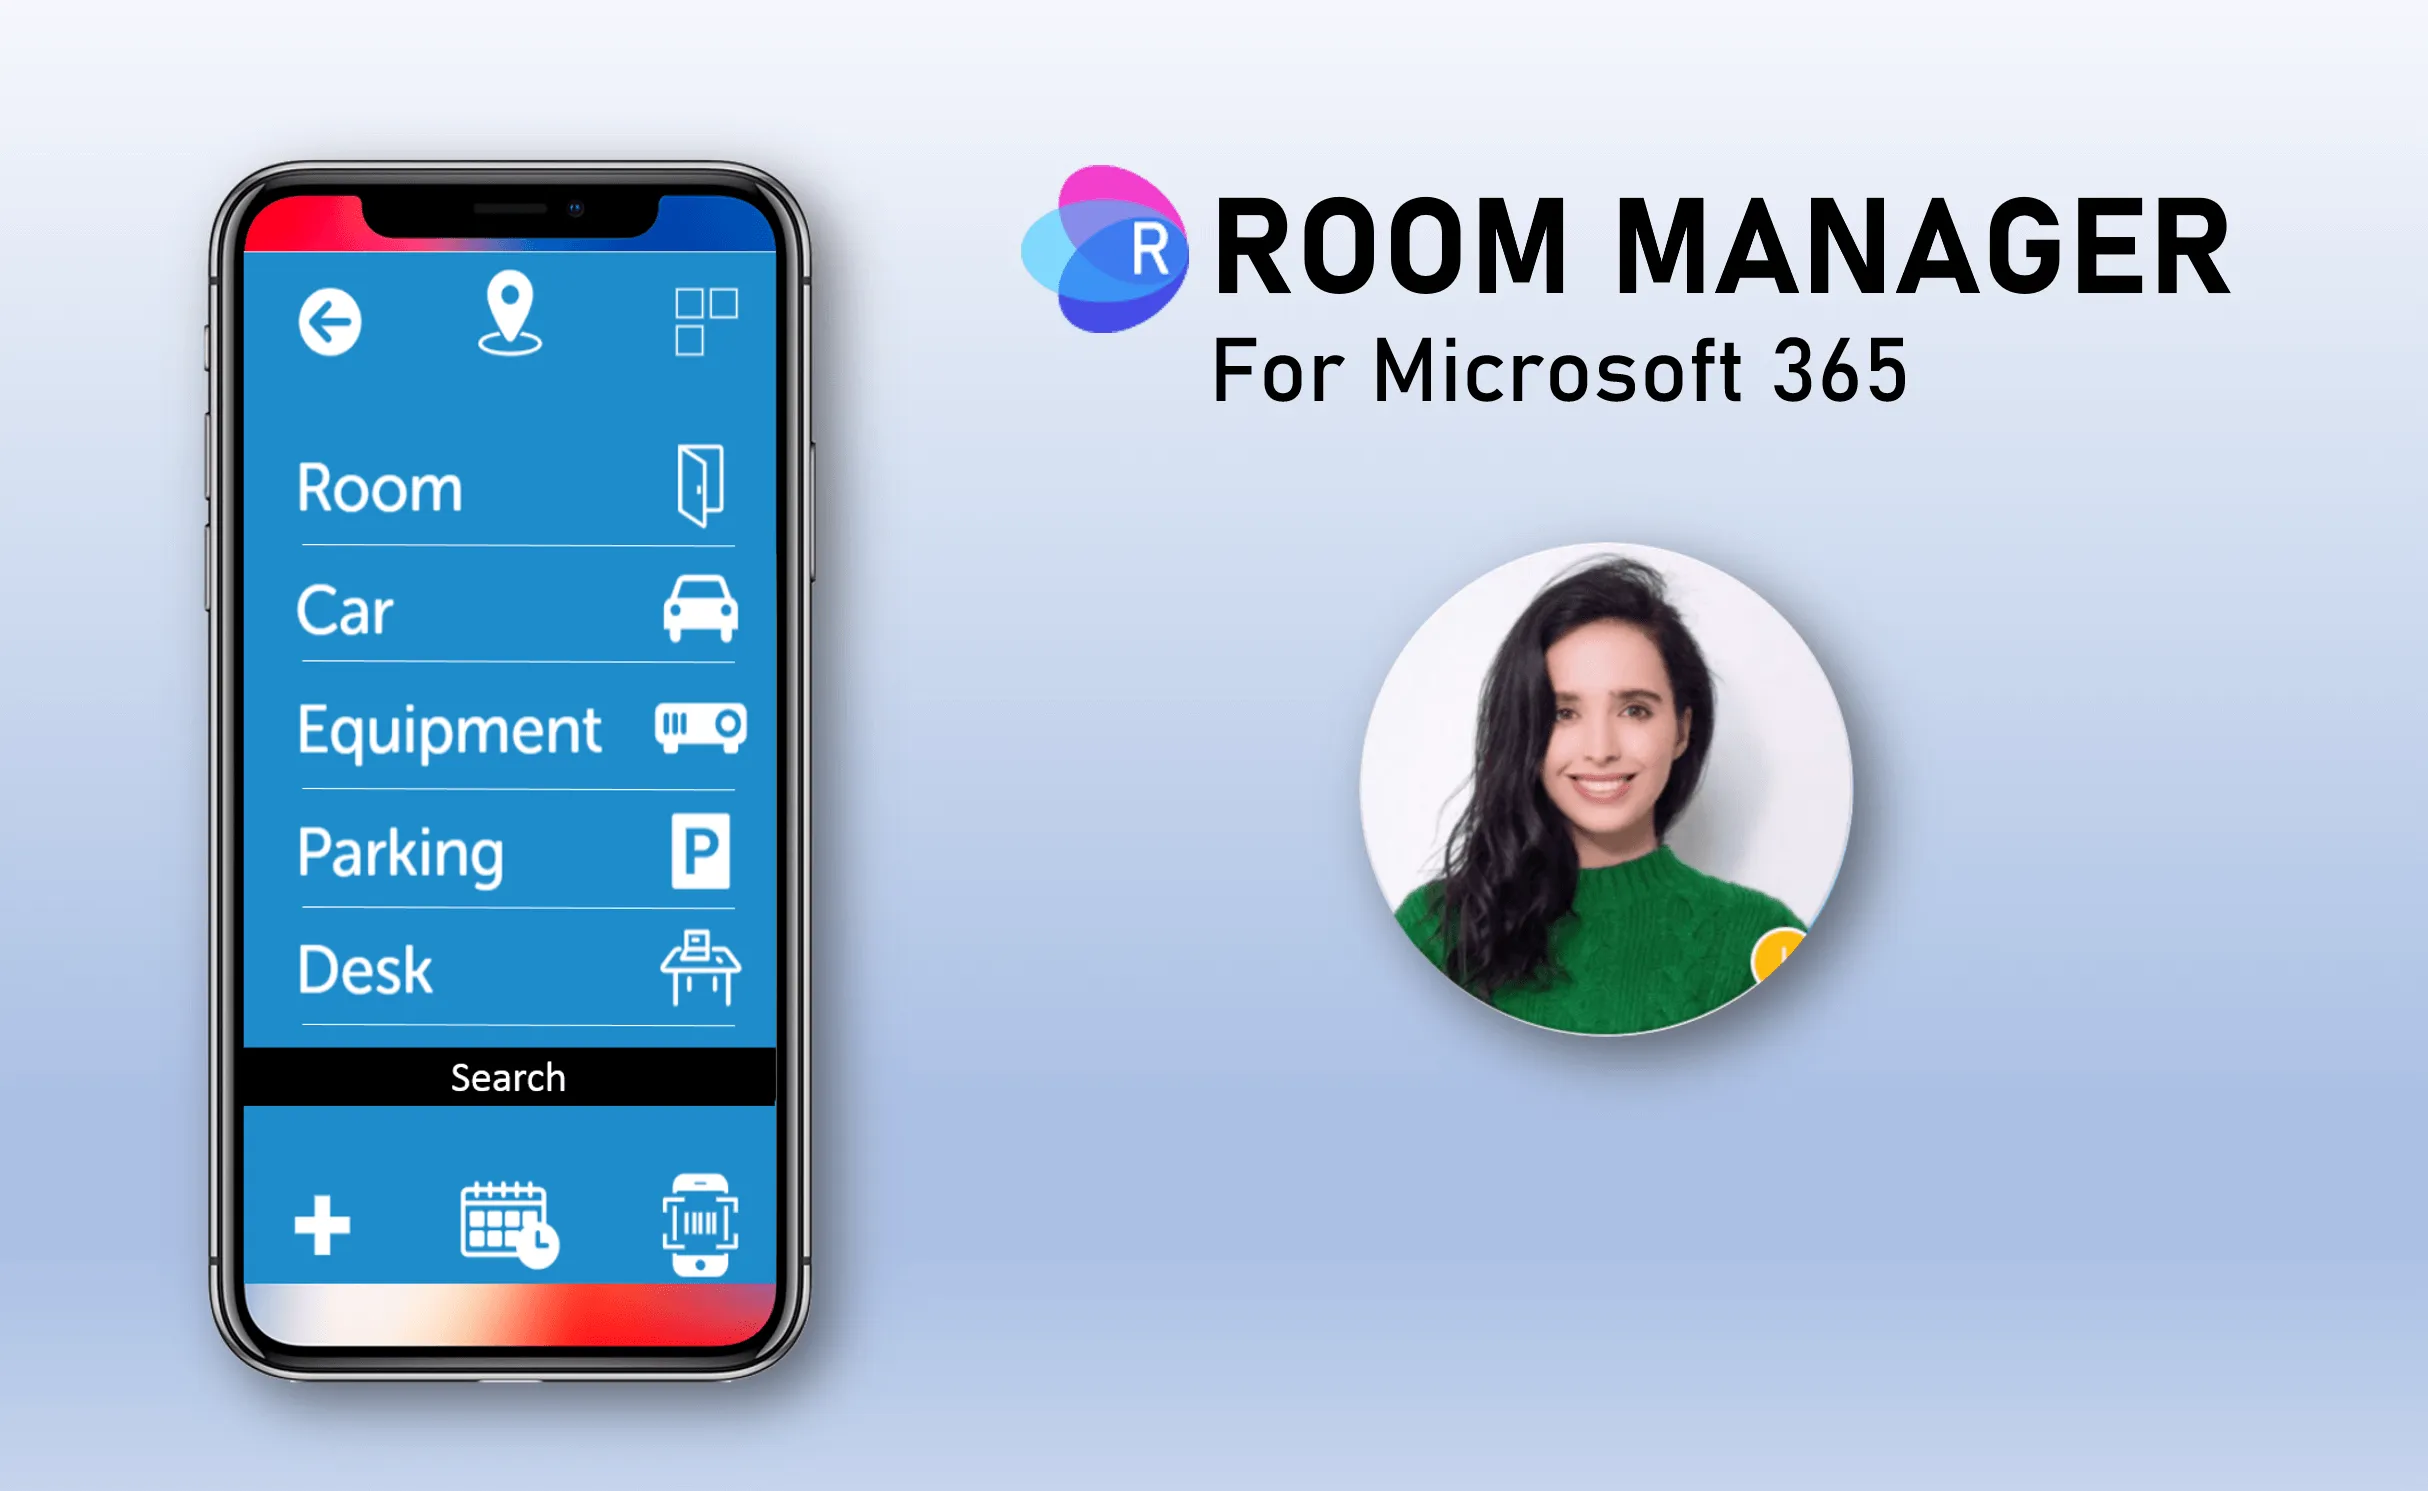 Room Manager Power App for Desk Booking